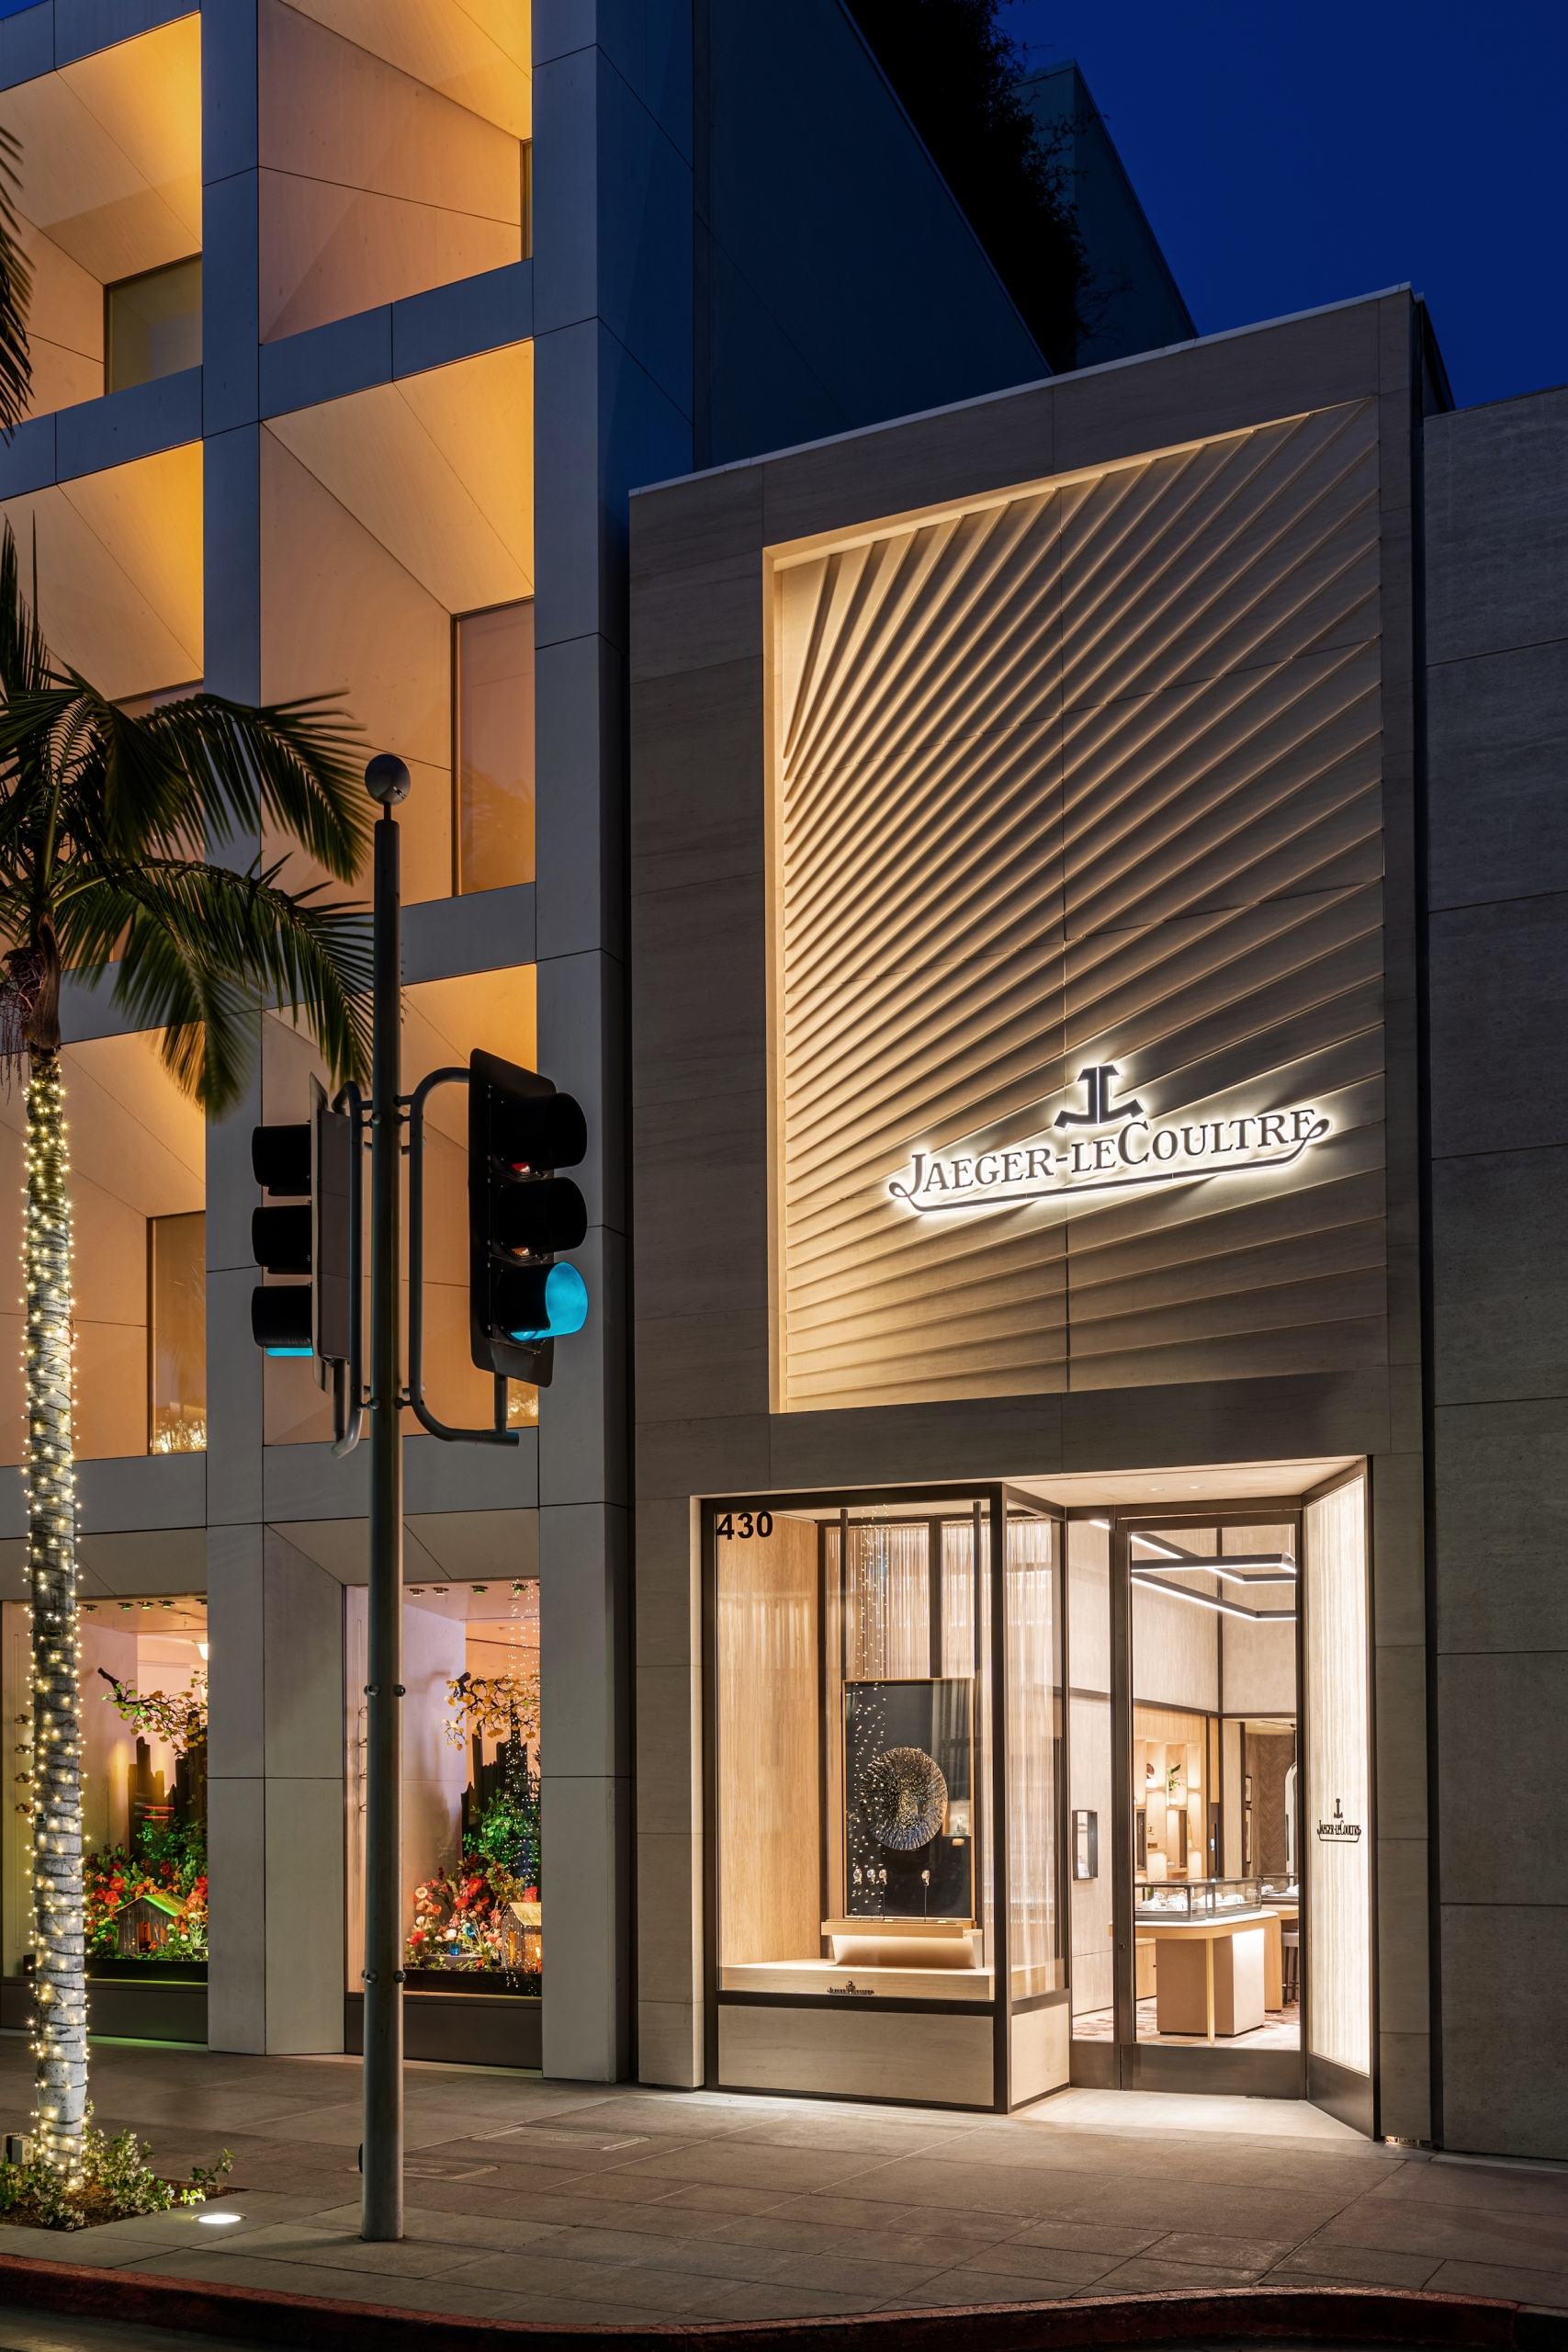 2022 Jaeger-LeCoultre Rodeo Drive storefront